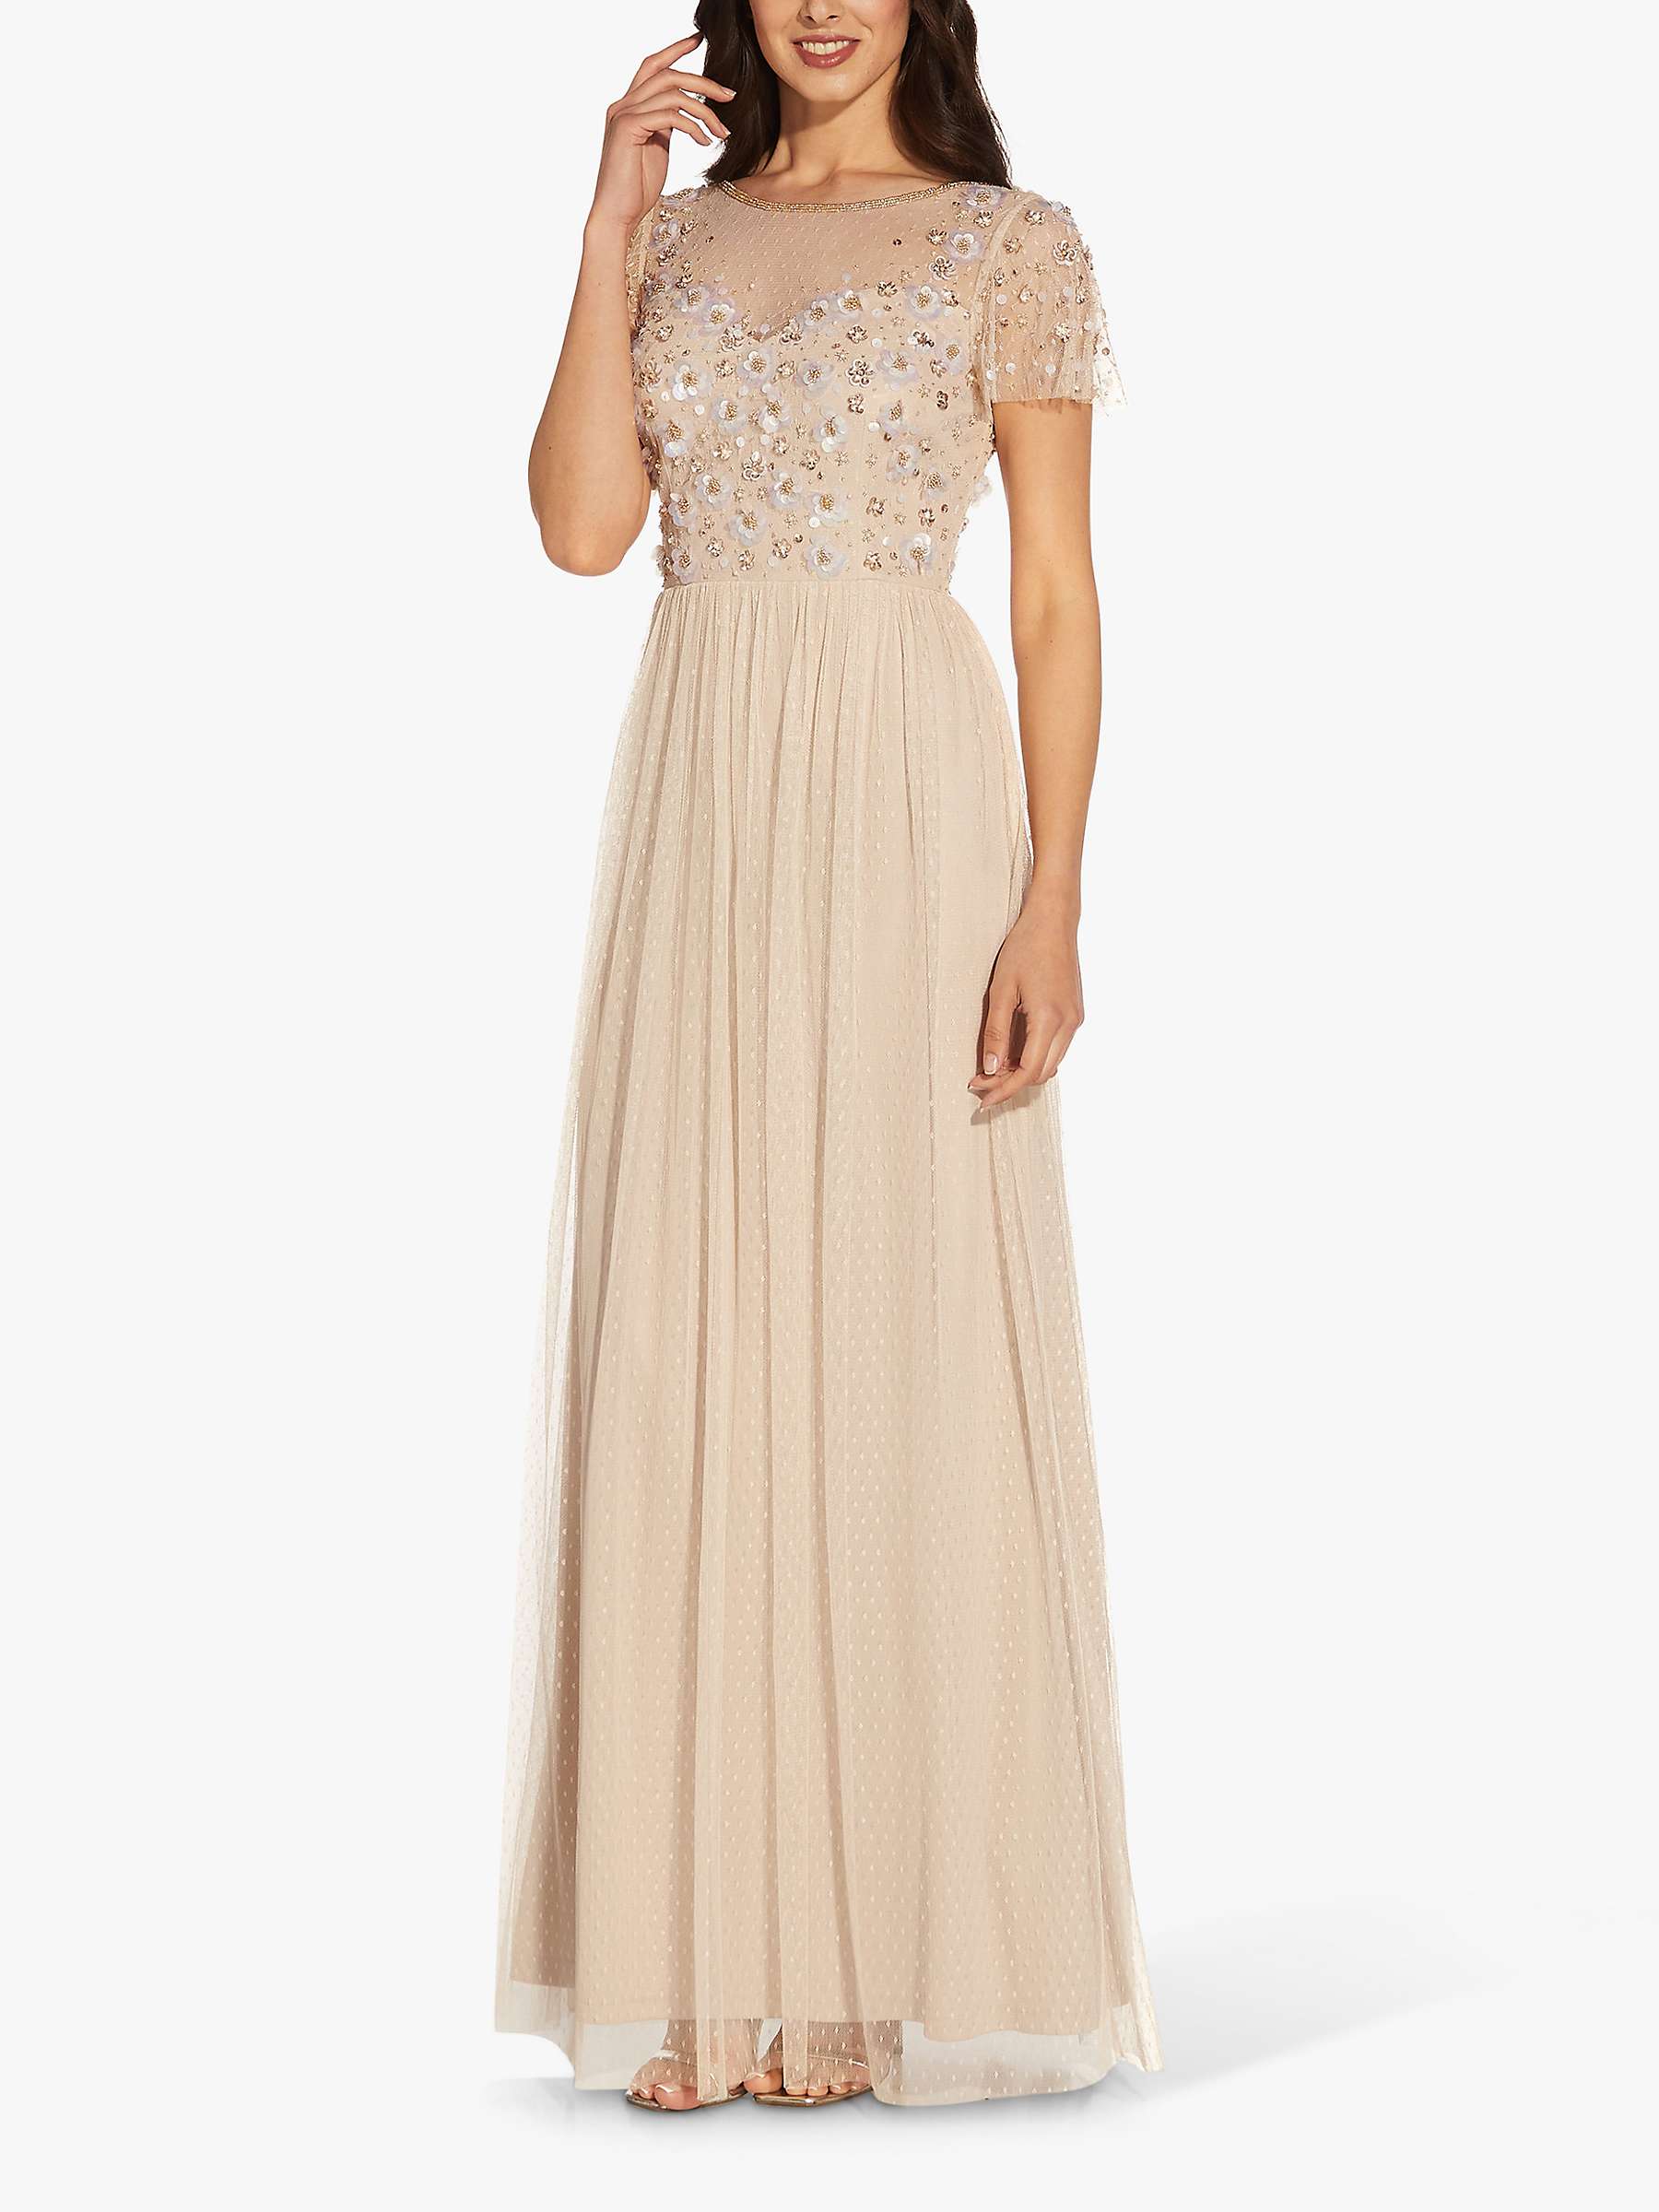 Buy Adrianna Papell 3D Beaded Point Maxi Dress, Biscotti Online at johnlewis.com